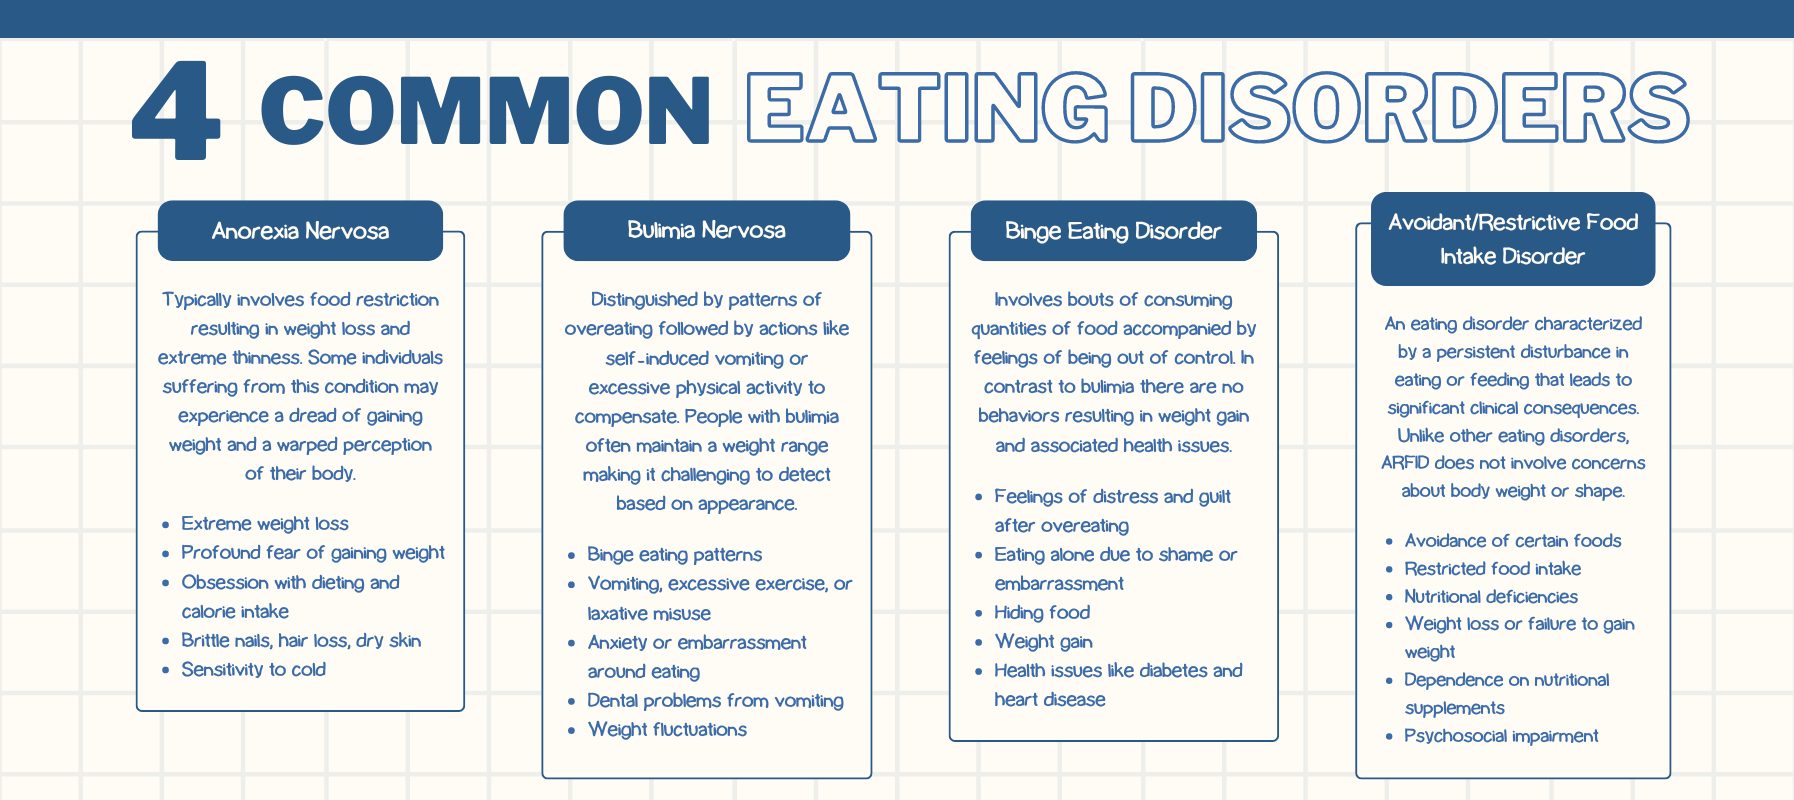 4 common eating disorders (2000 x 800 px)